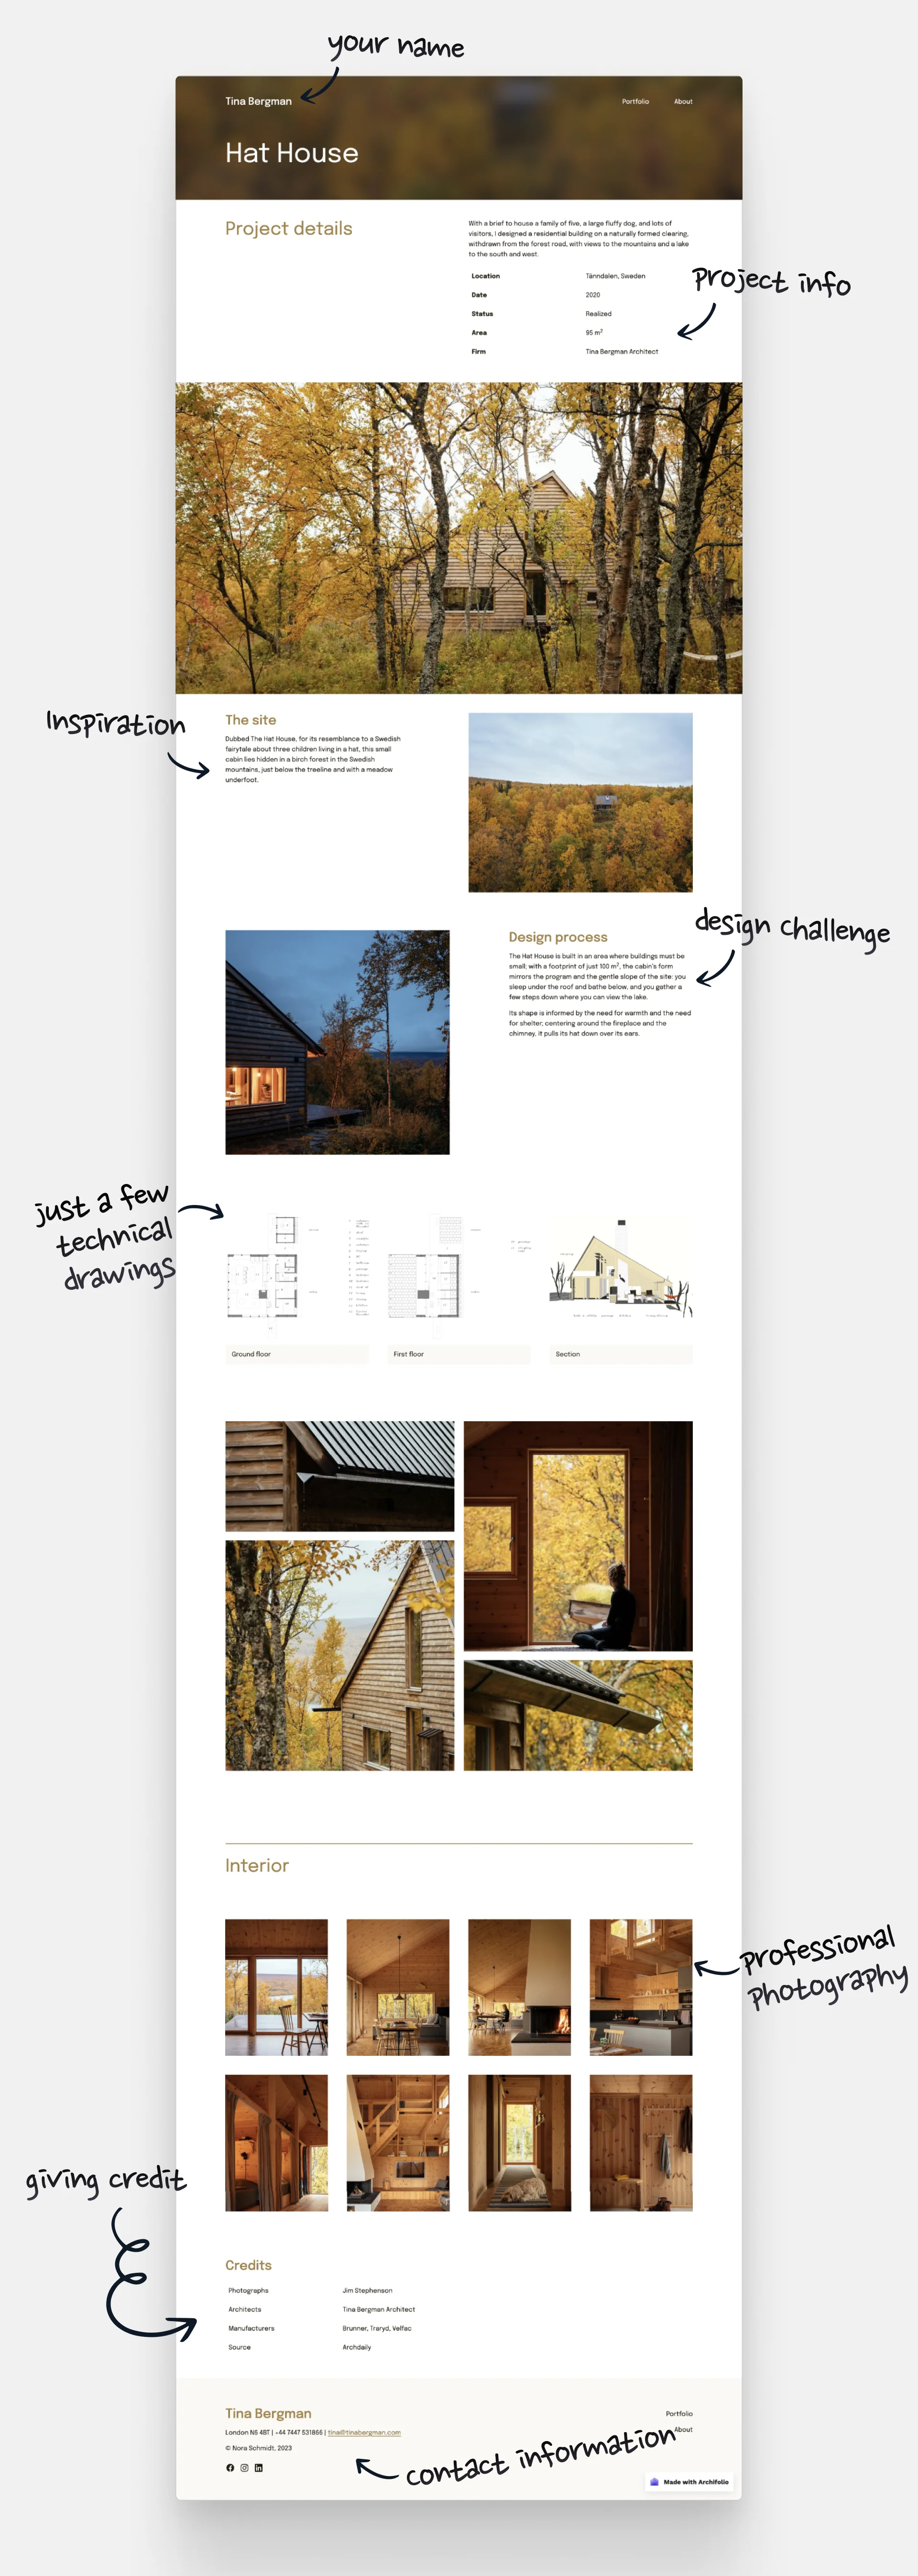 A screenshot of a residential architecture portfolio's project page with project images containing a lot of yellowish colors